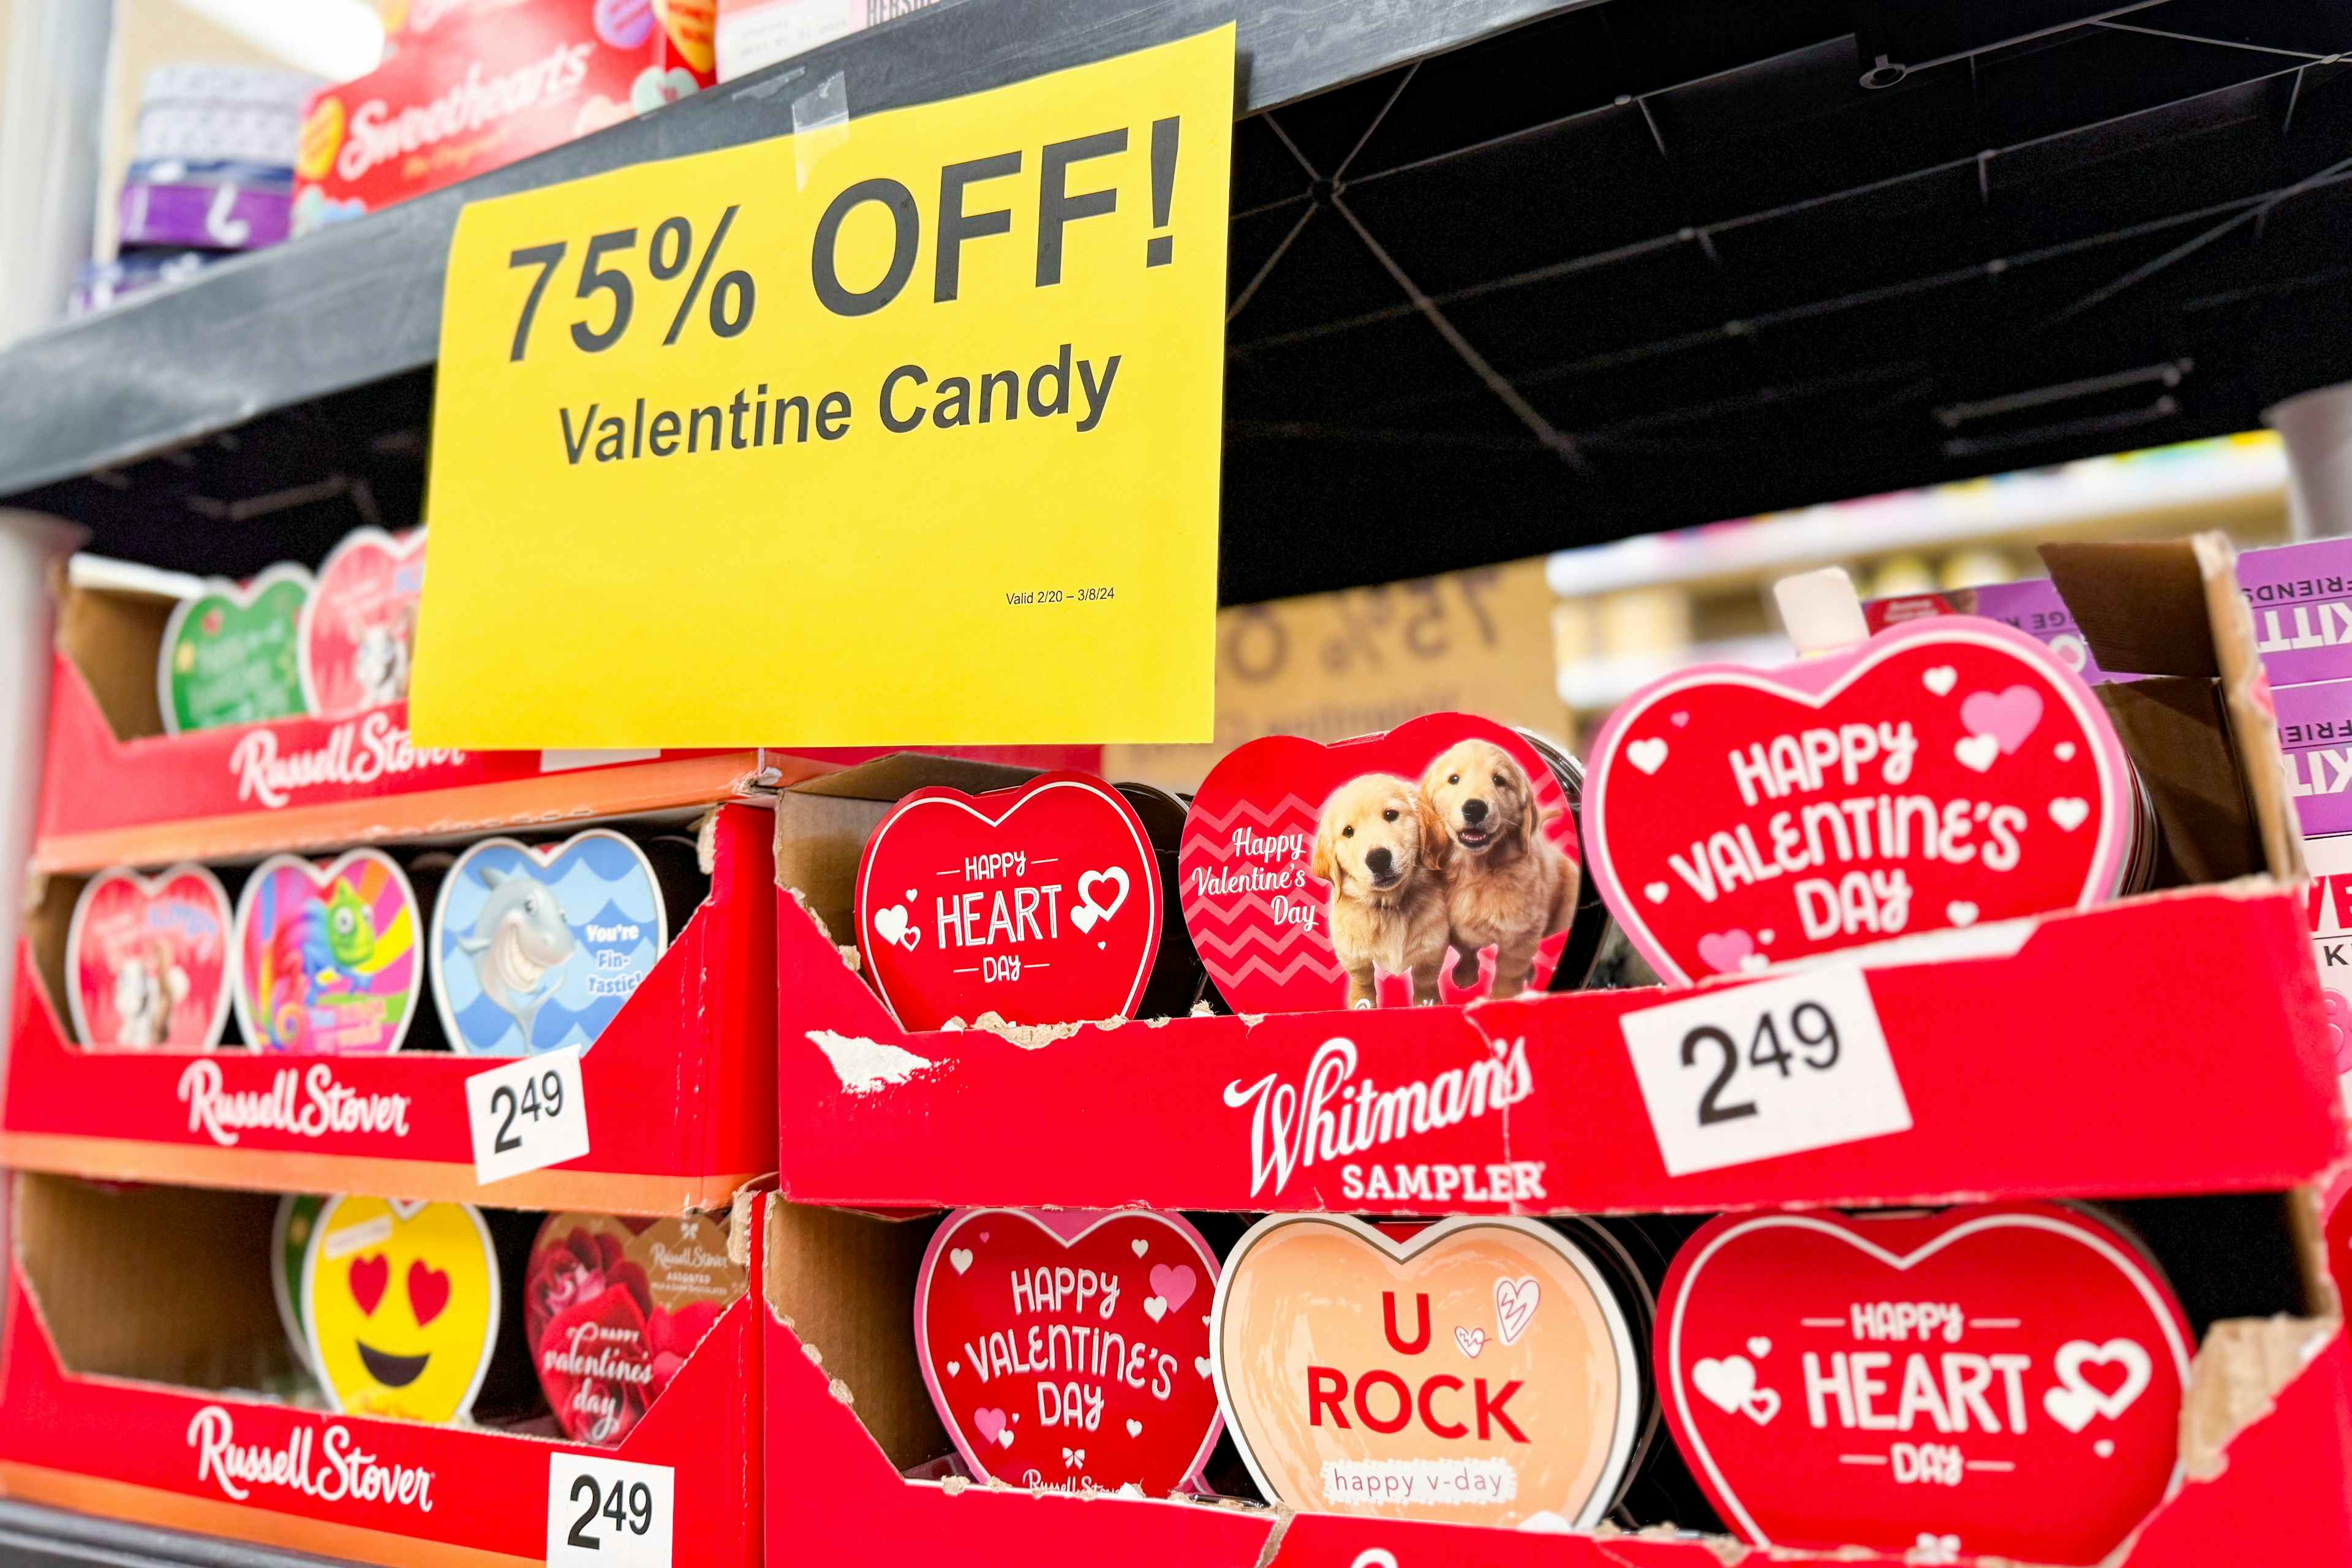 walgreens valentine-s day clearance